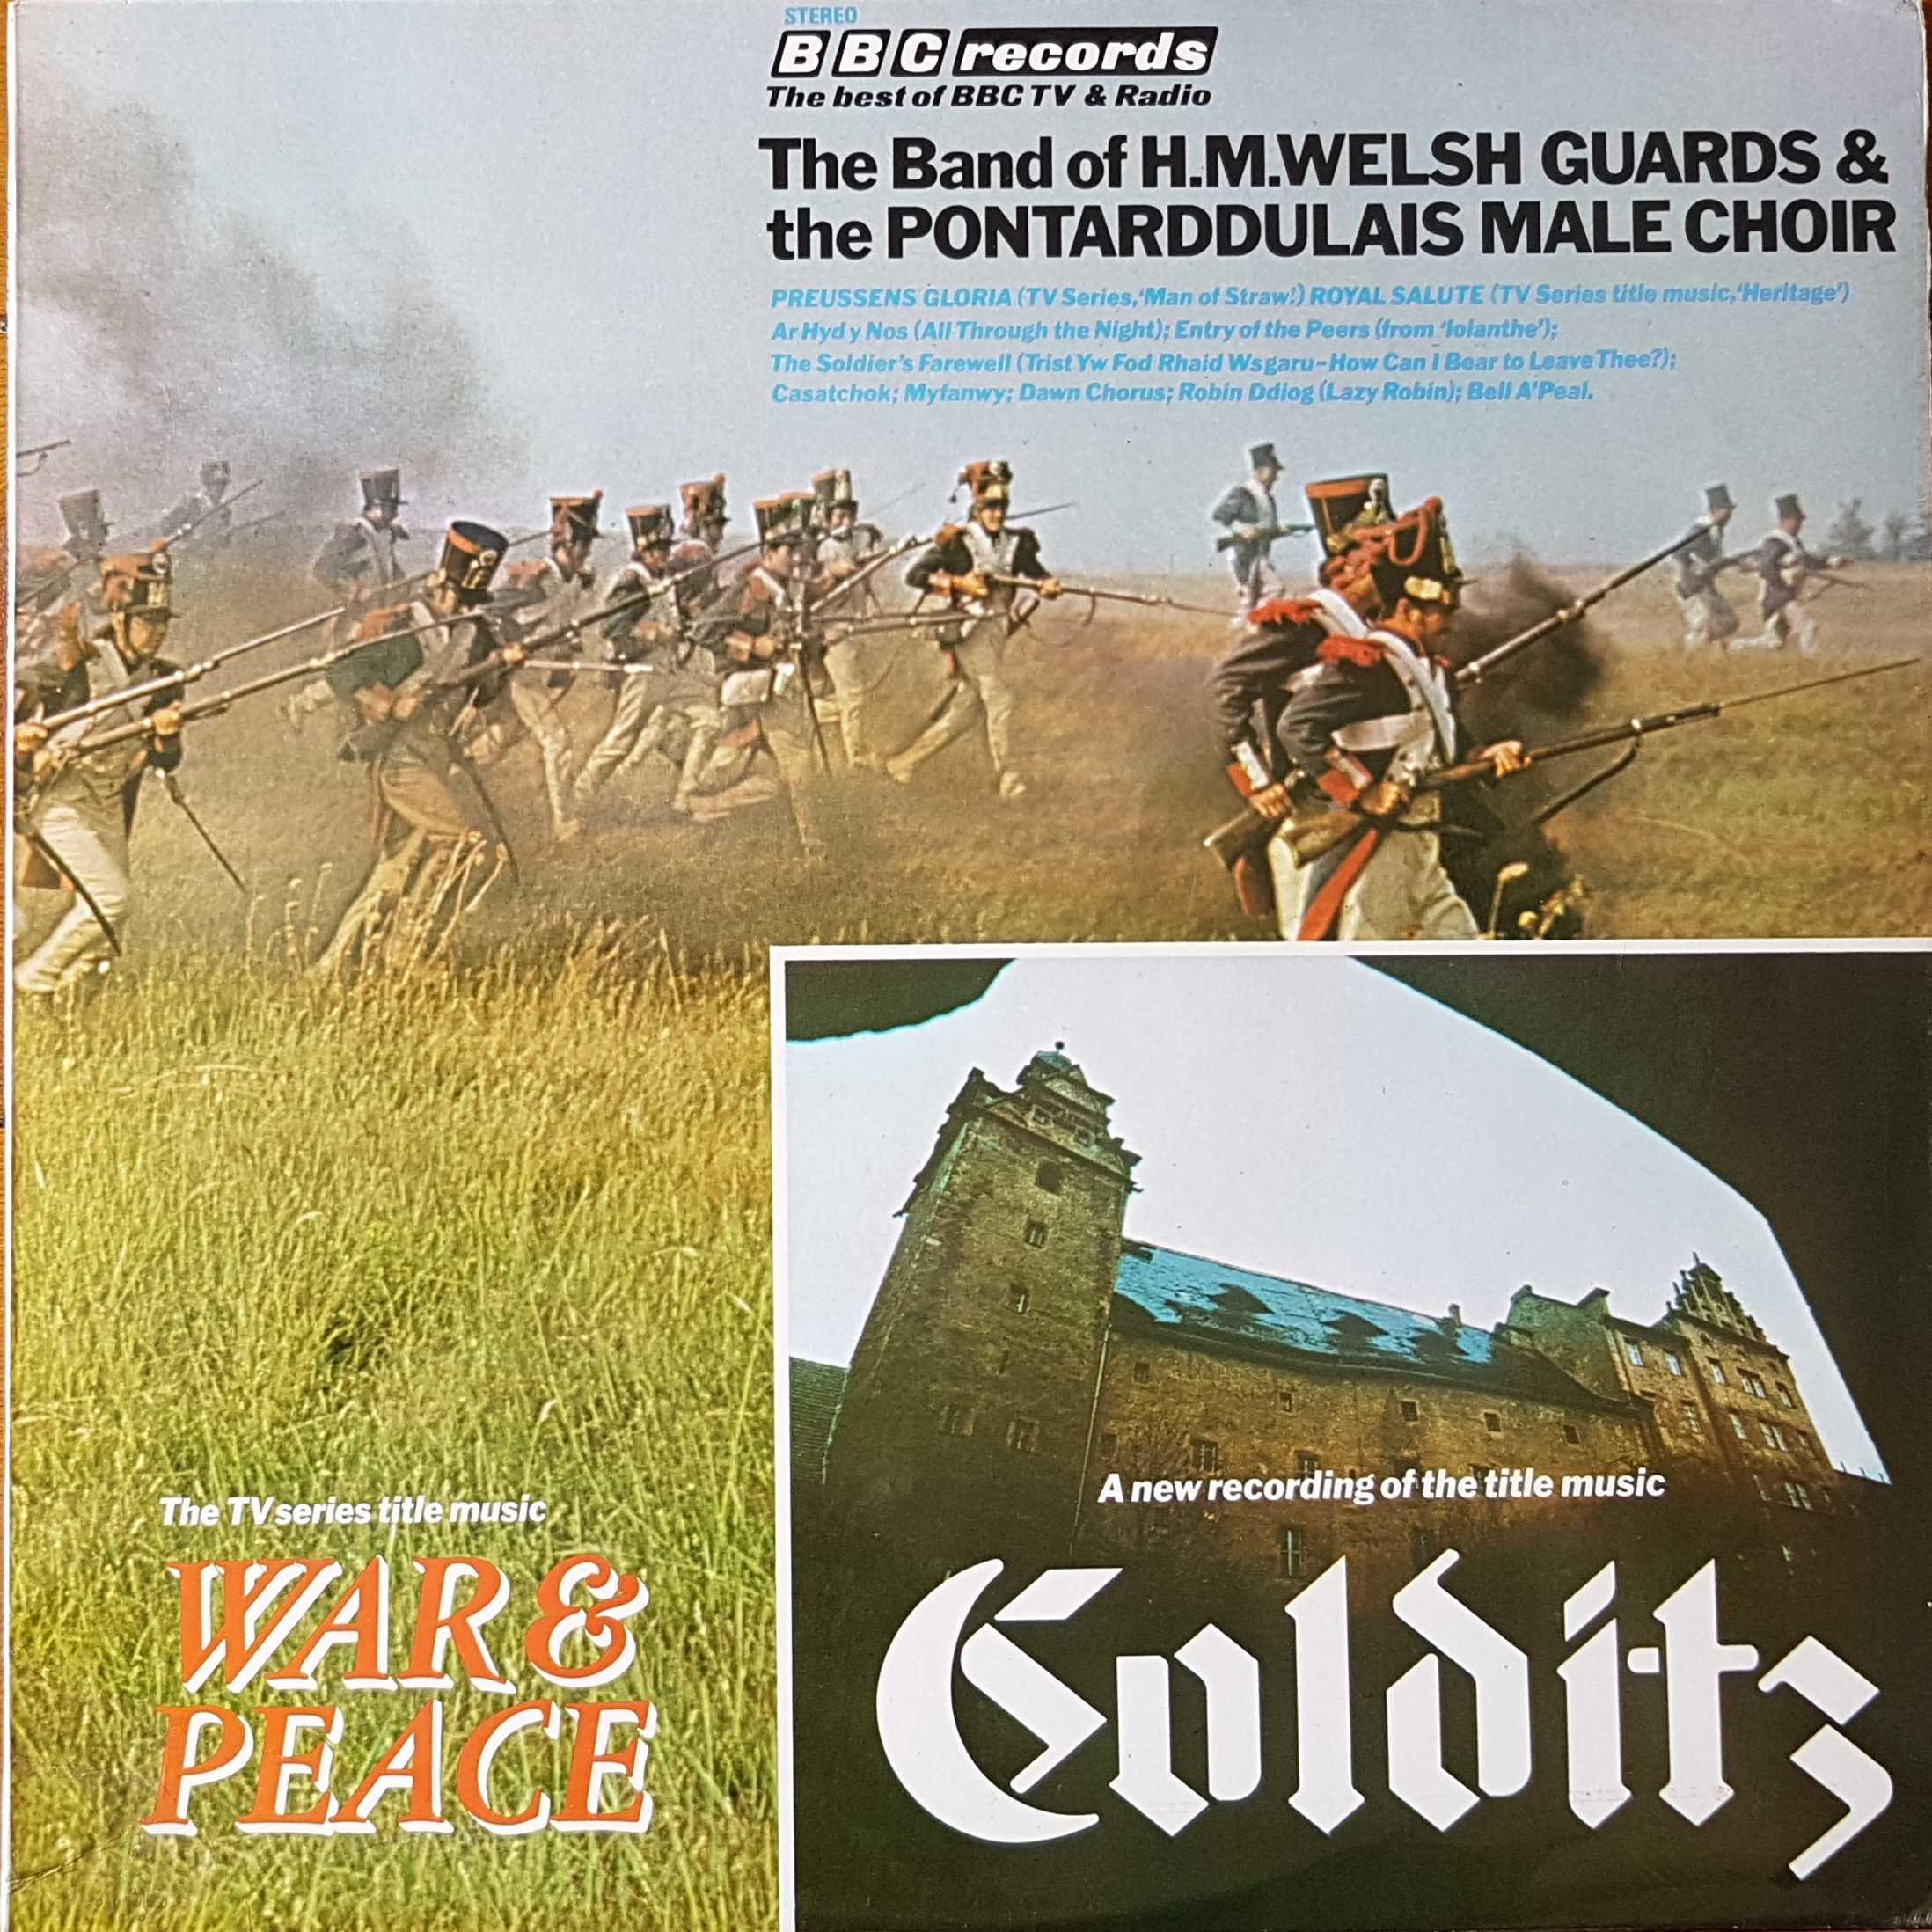 Picture of REC 146 War and peace (Colditz) by artist Various from the BBC albums - Records and Tapes library